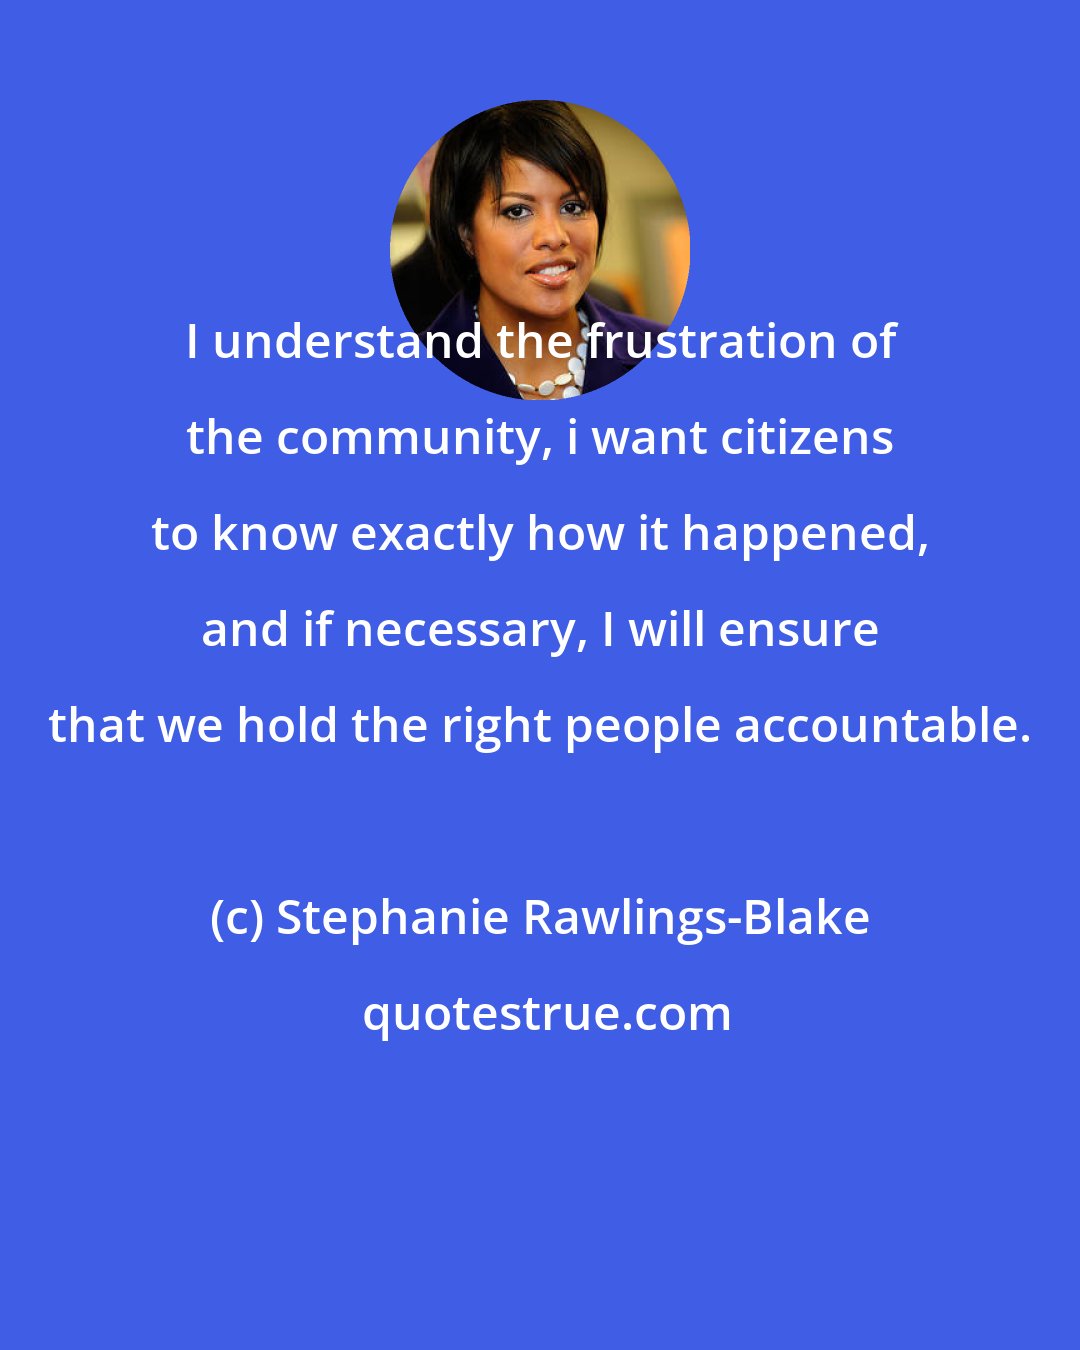 Stephanie Rawlings-Blake: I understand the frustration of the community, i want citizens to know exactly how it happened, and if necessary, I will ensure that we hold the right people accountable.